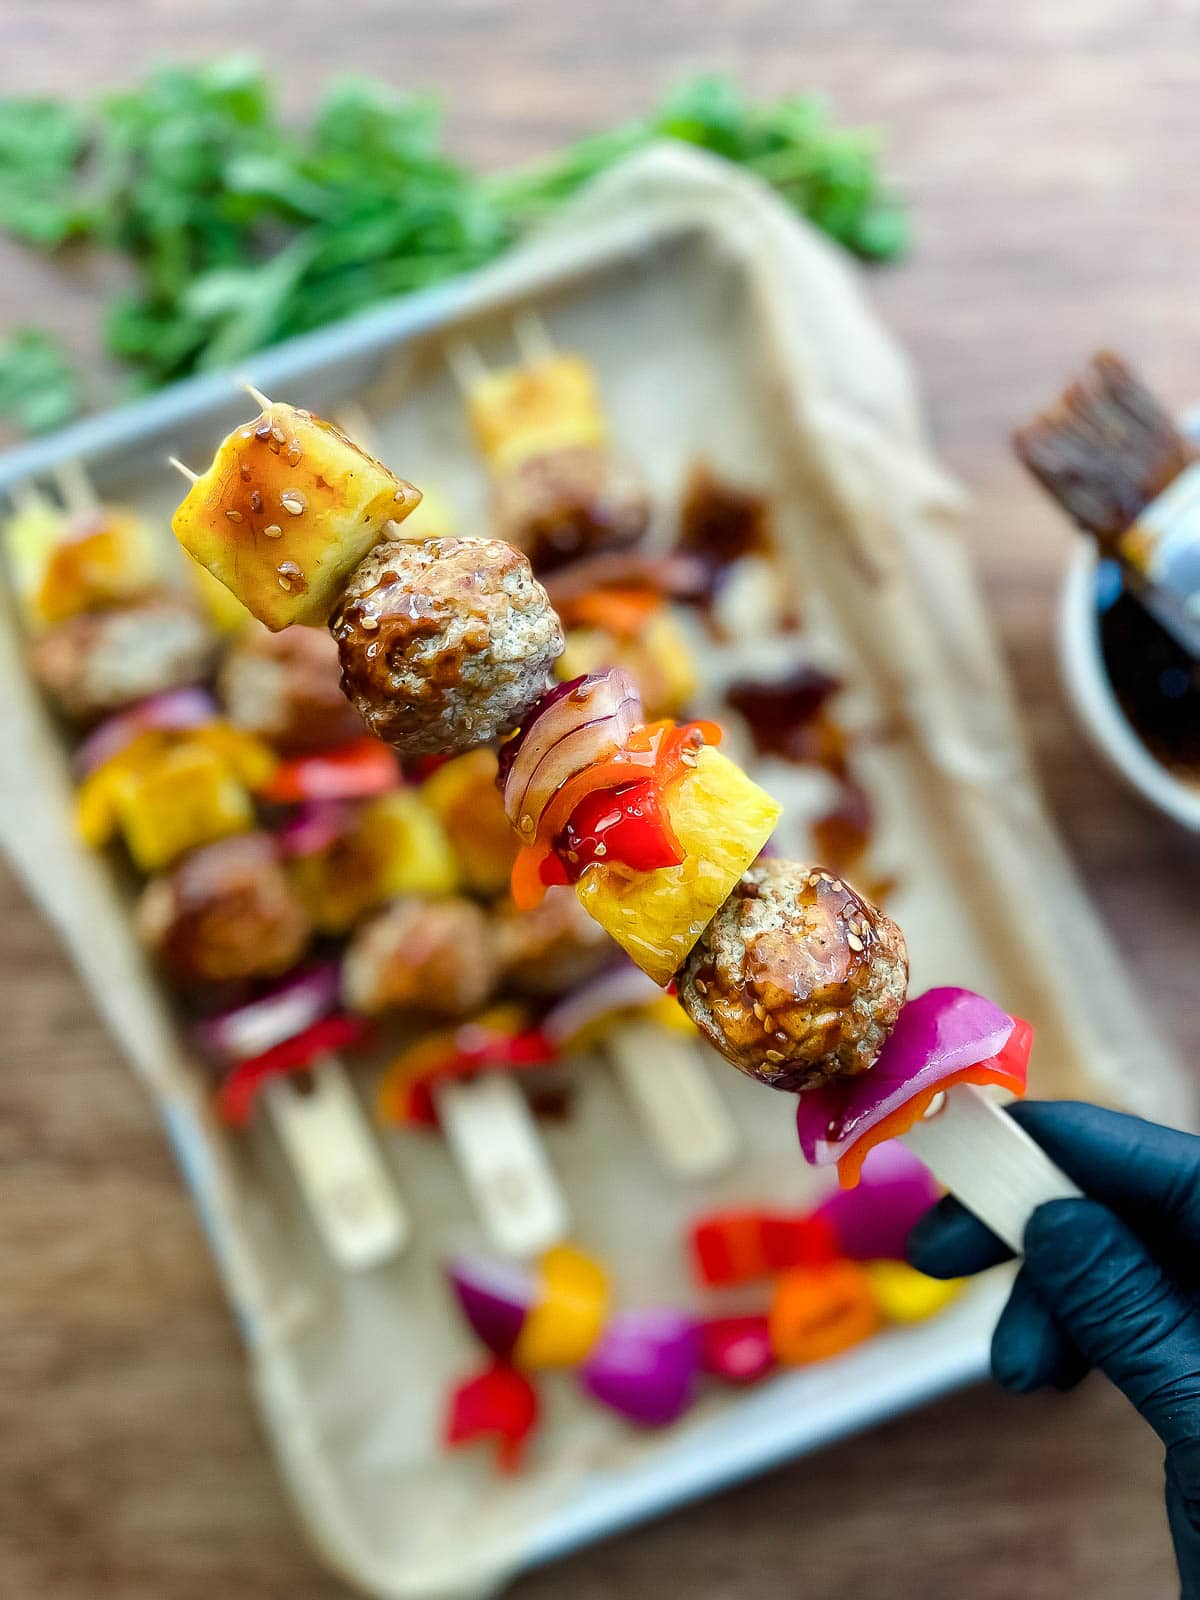 A close-up image of a gloved hand holding up a turkey meatball skewer ready for the grill, with other skewers beneath on top of a baking sheet.